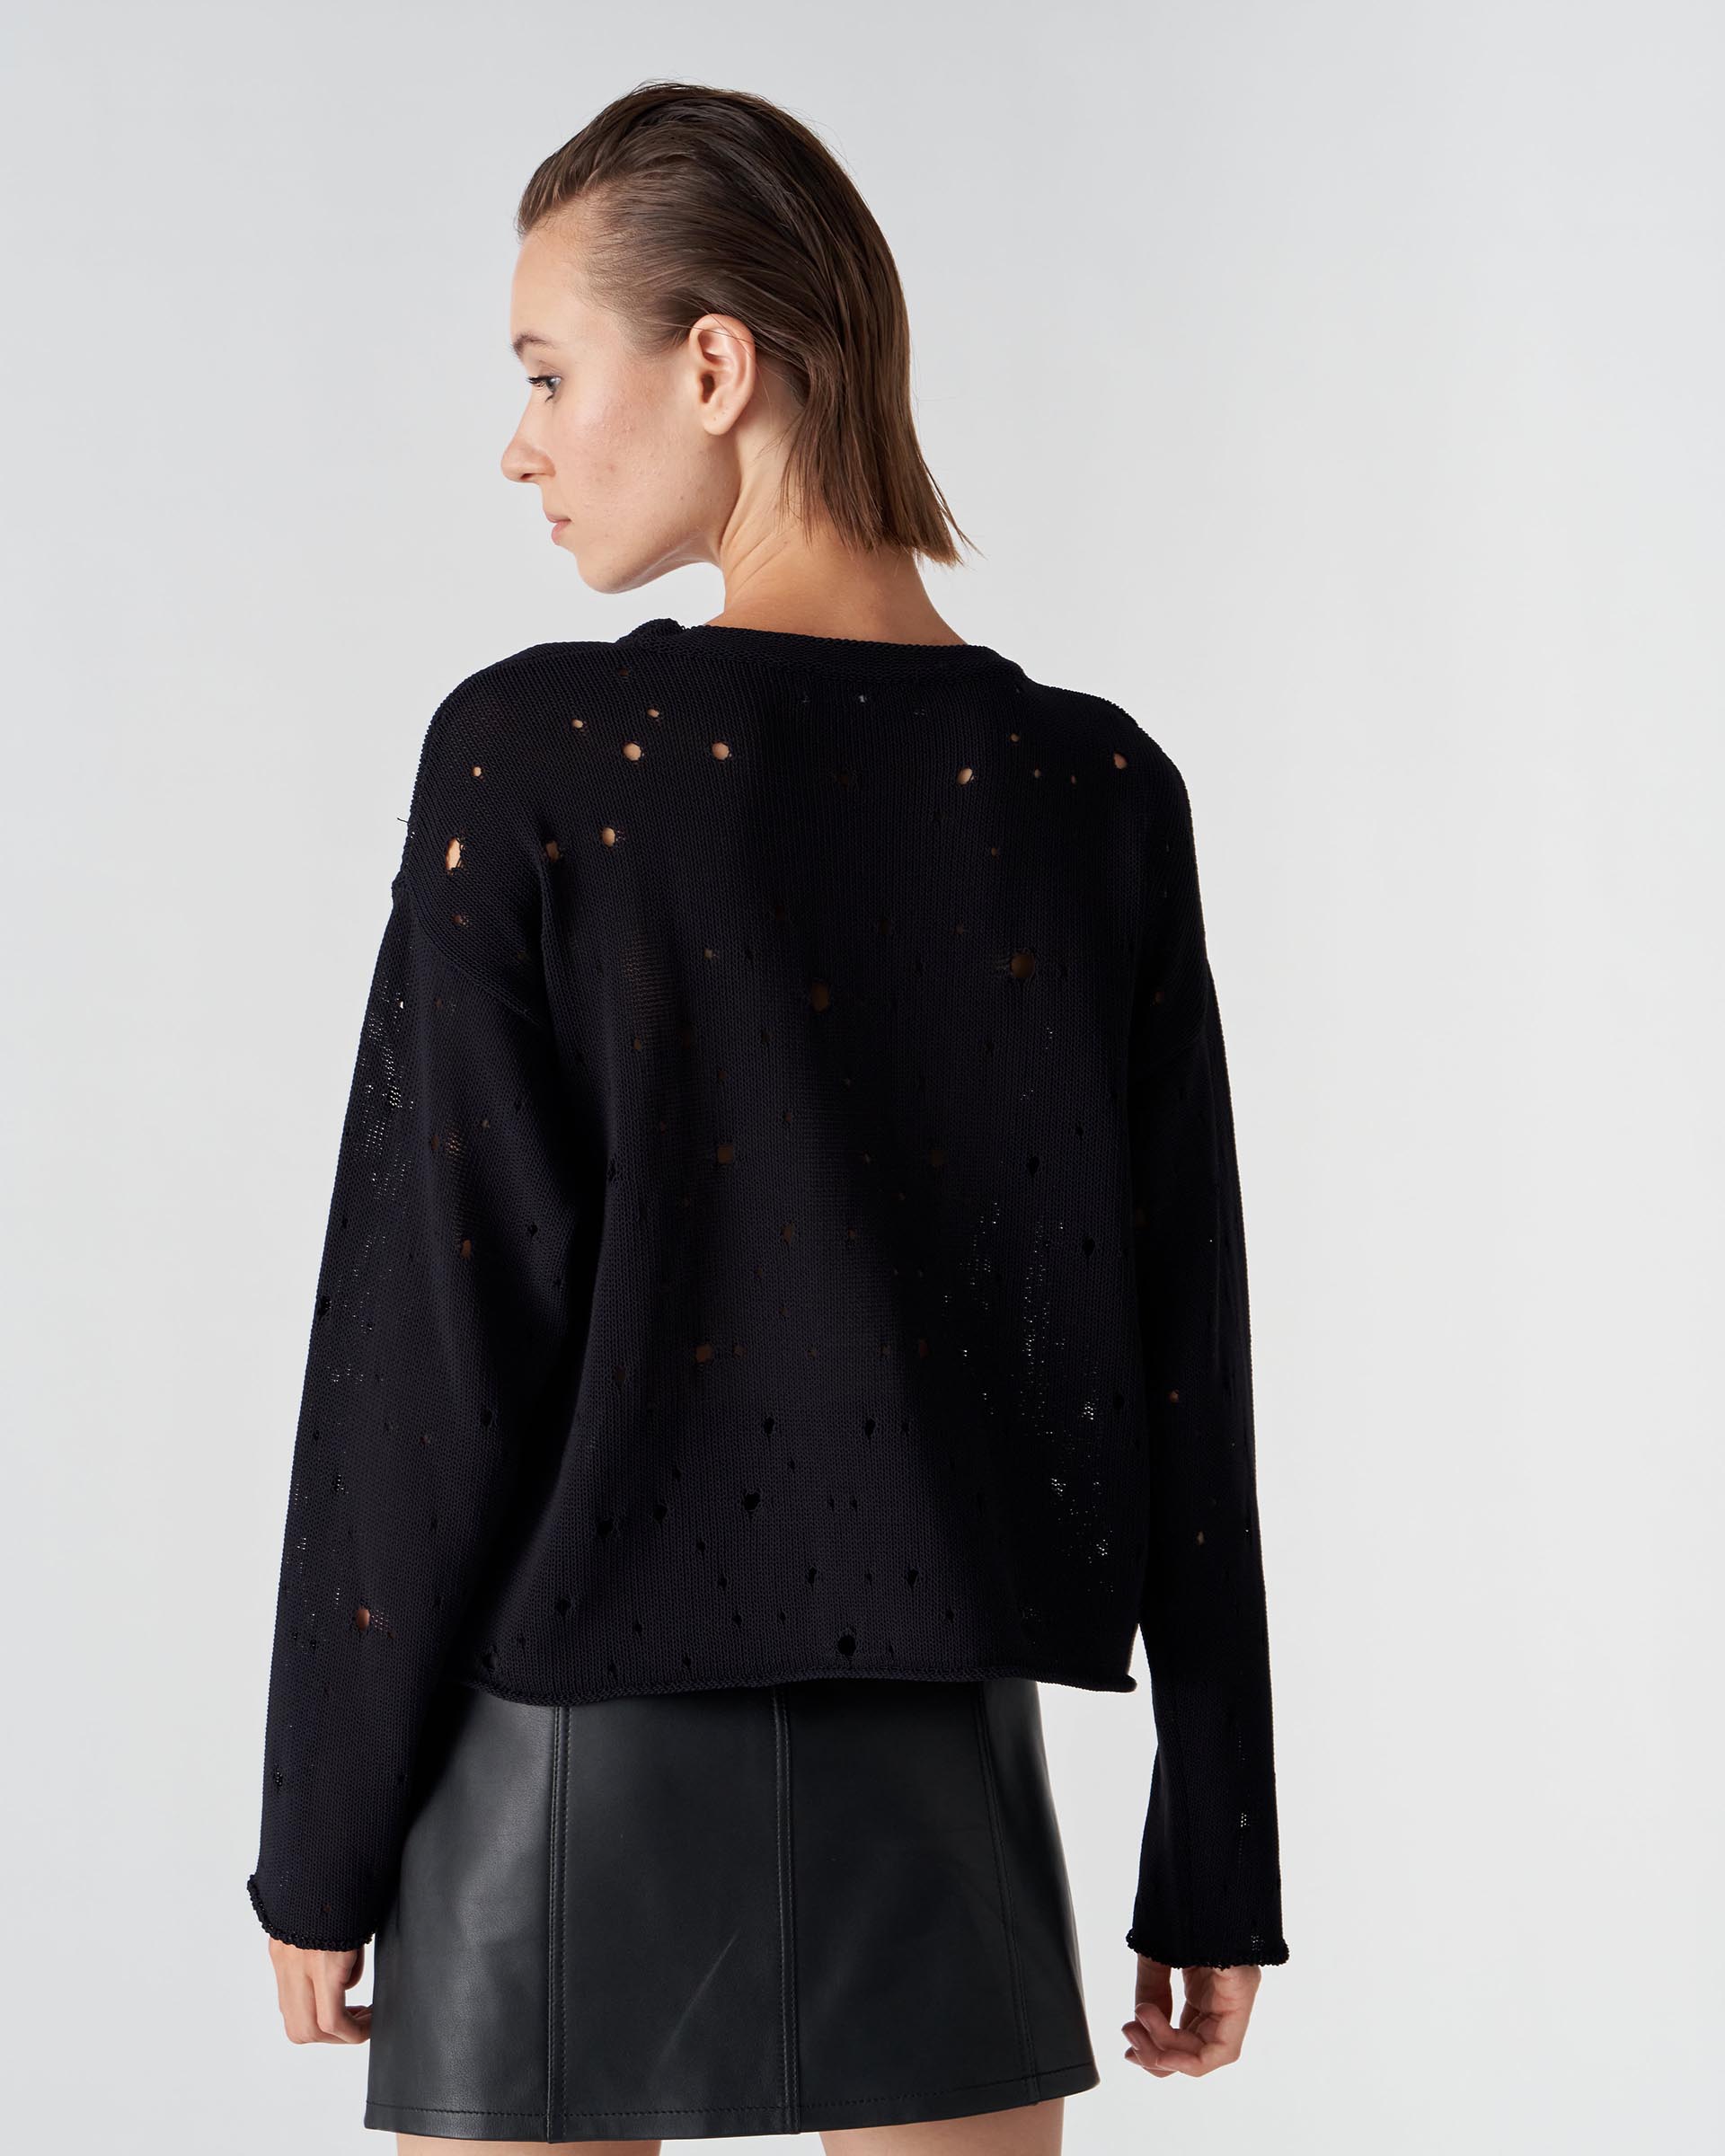 The Market Store | Box Sweater With Holes